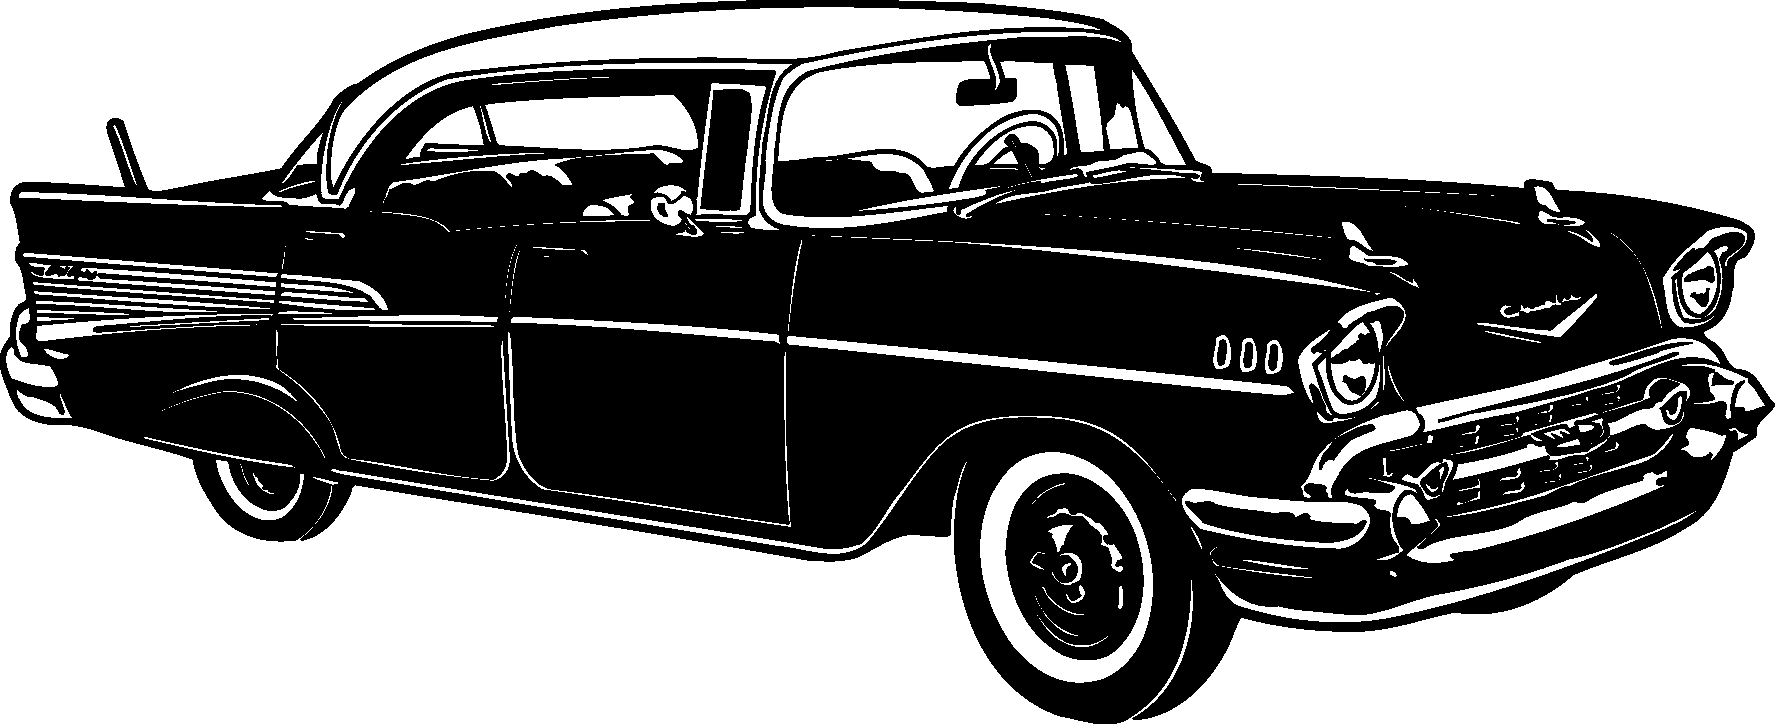 Transport, Classic Cars Silhouettes 